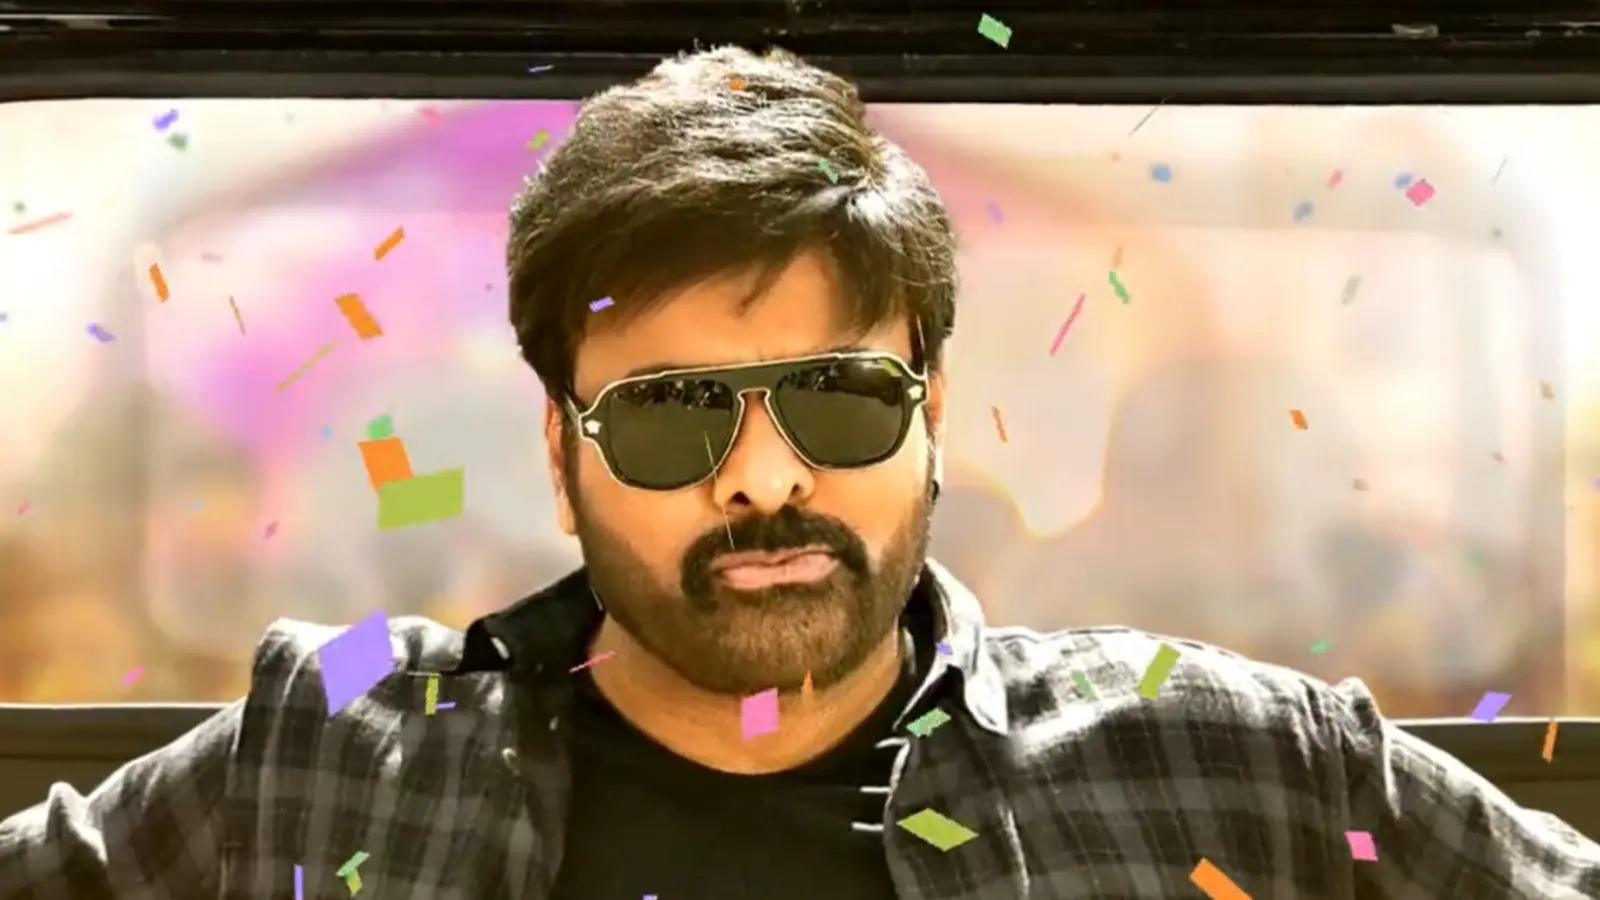 Chiranjeevi shares his first look from upcoming Telugu film Bholaa Shankar, fans love his vibe. Watch